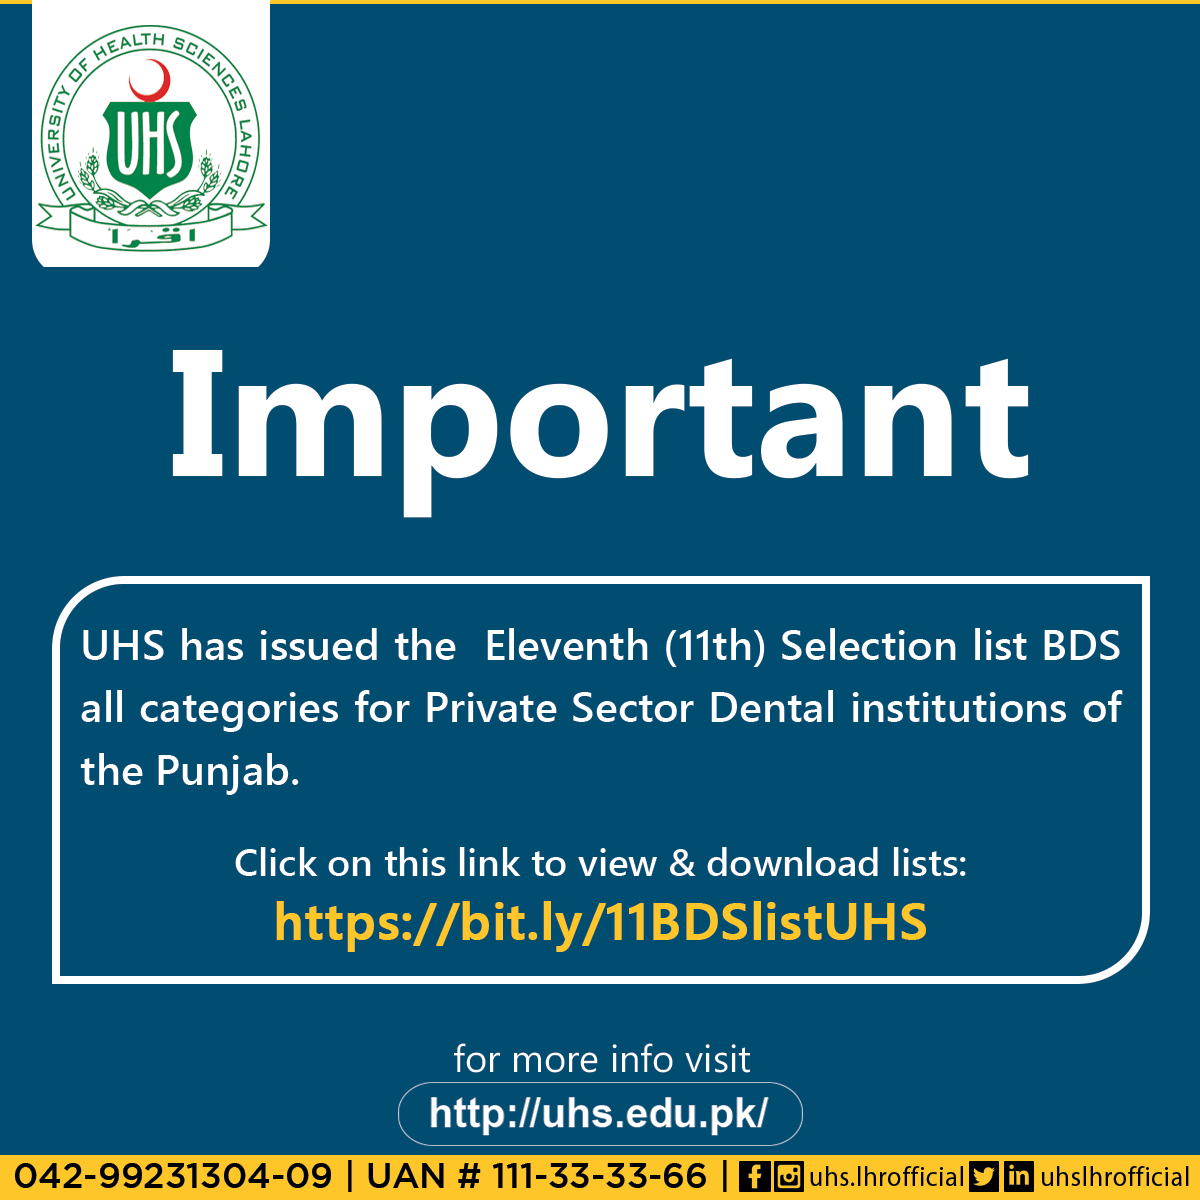 UHS has issued the Eleventh (11th) Selection list BDS all categories for Private Sector Dental institutions of the Punjab. Click on this link to view & download lists: bit.ly/11BDSlistUHS